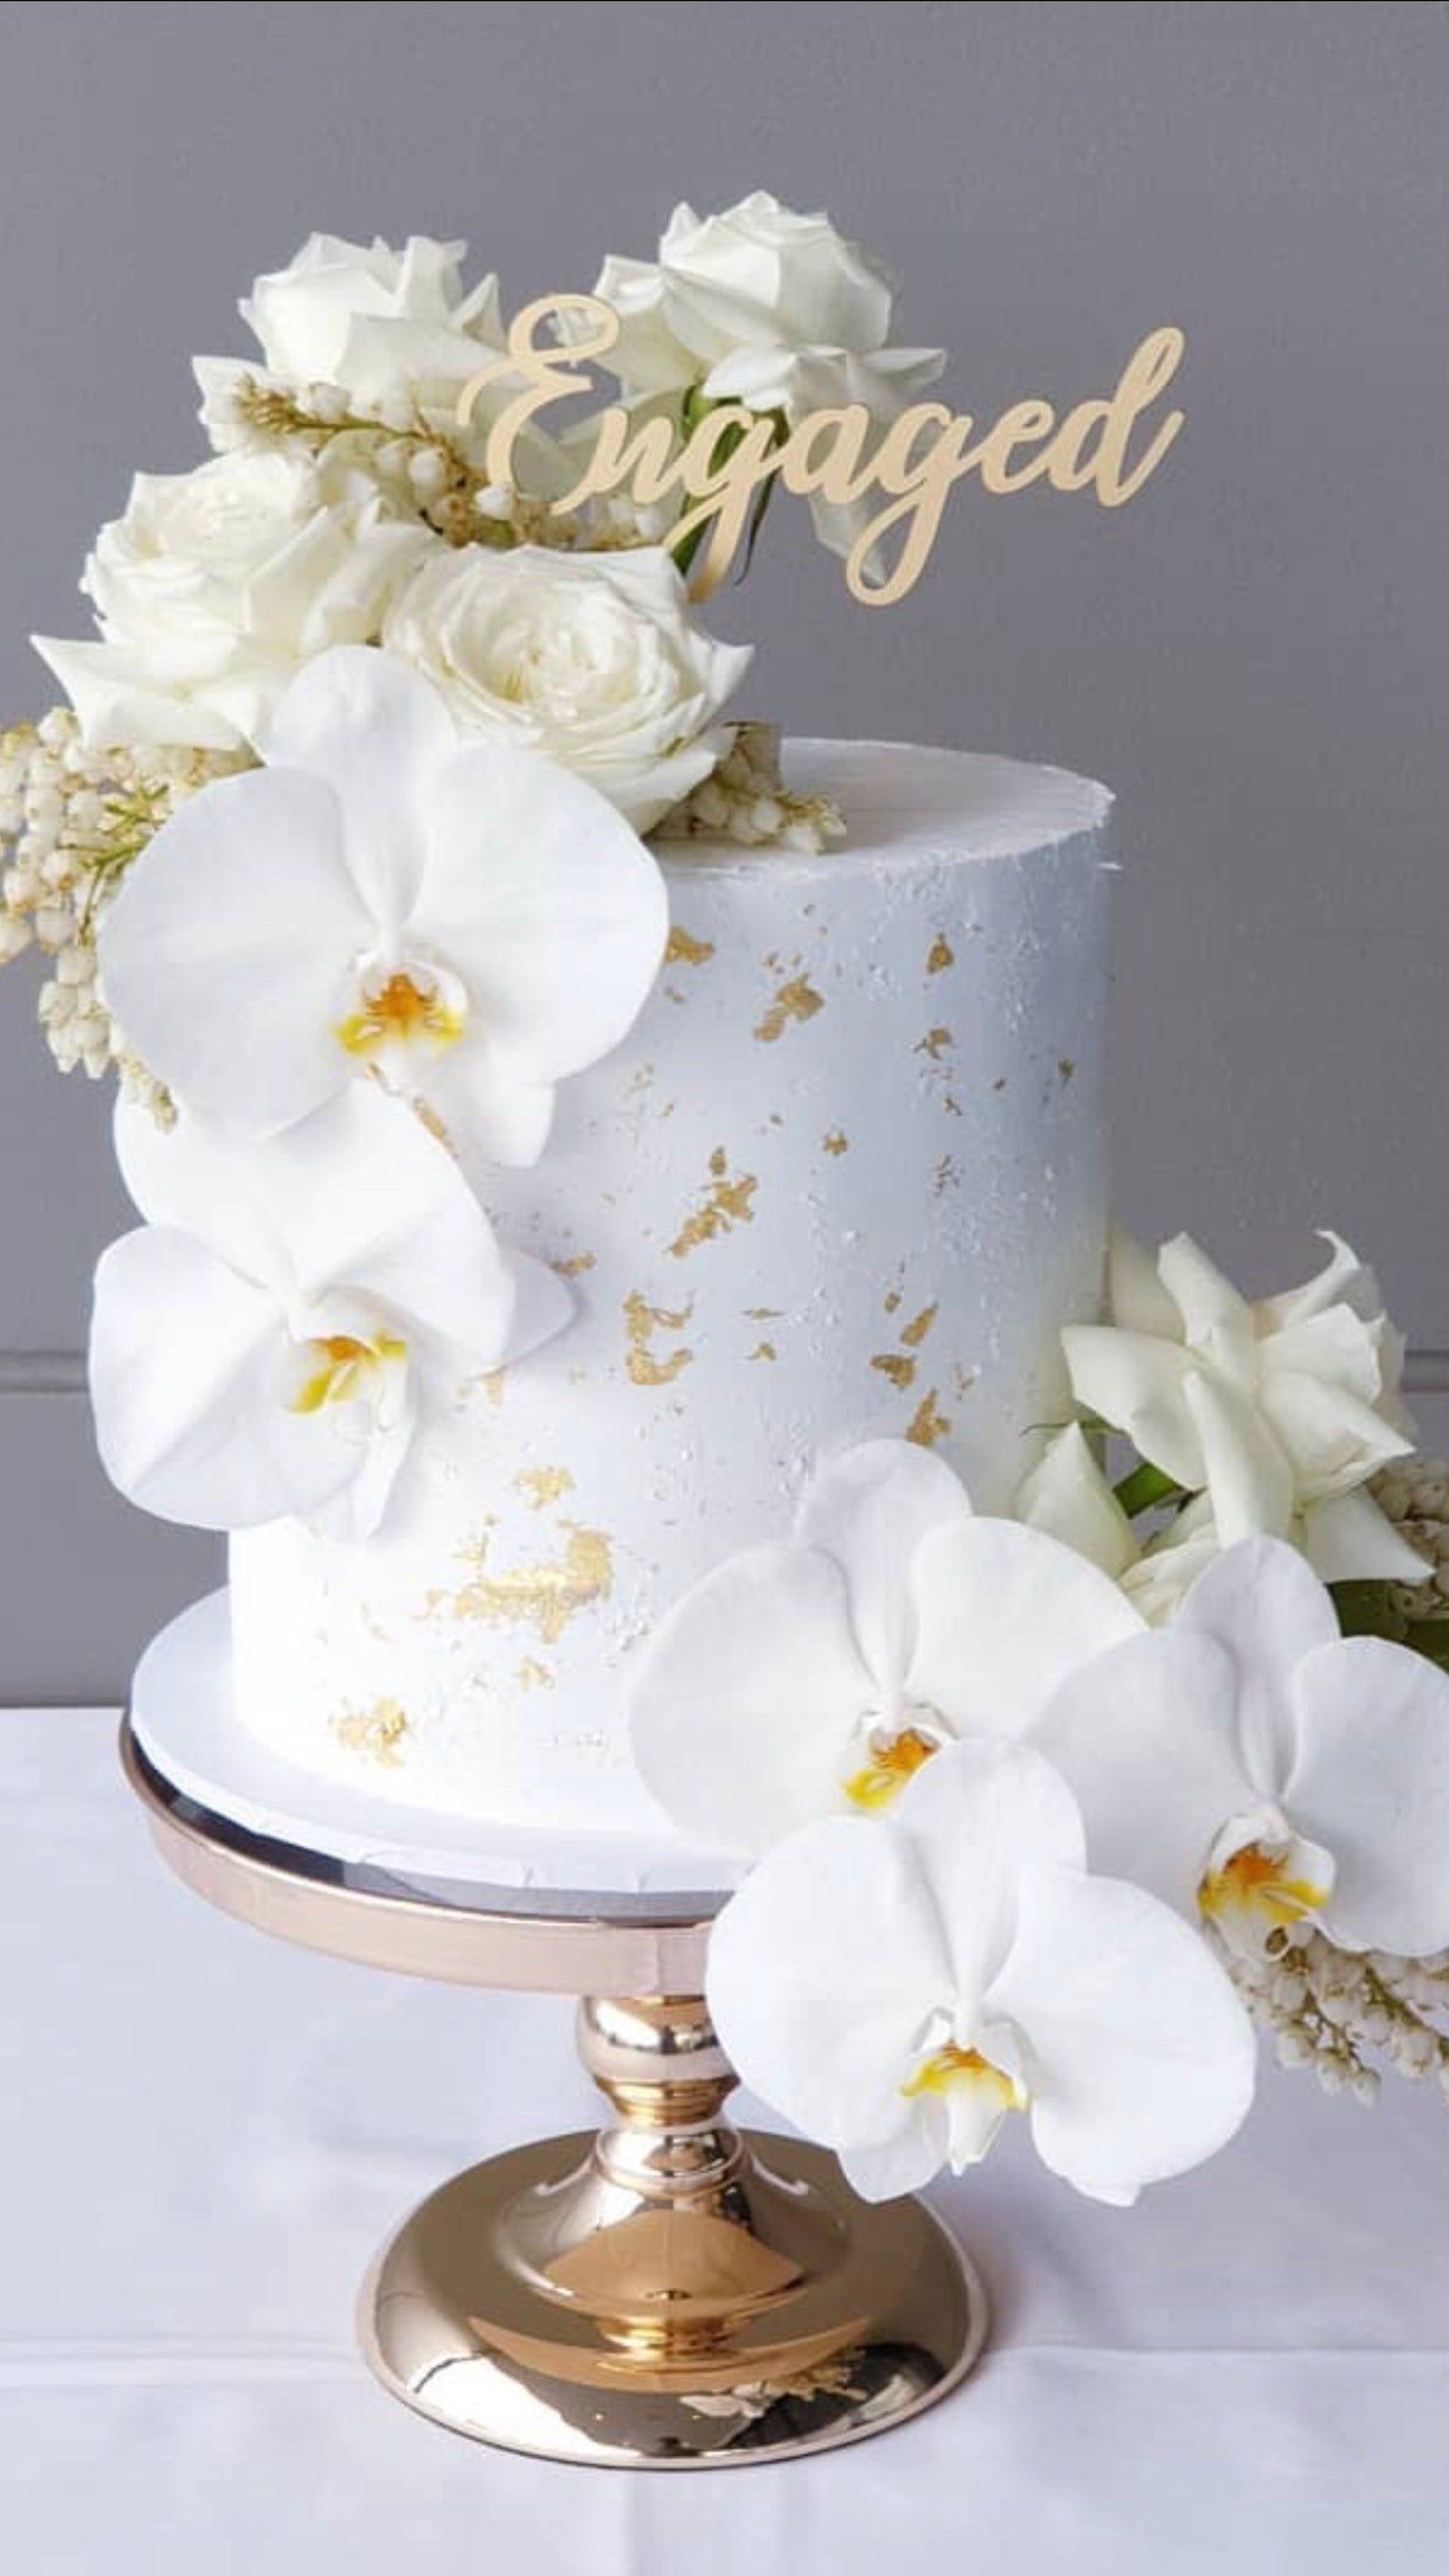 15 Awesome Engagement Cake Designs